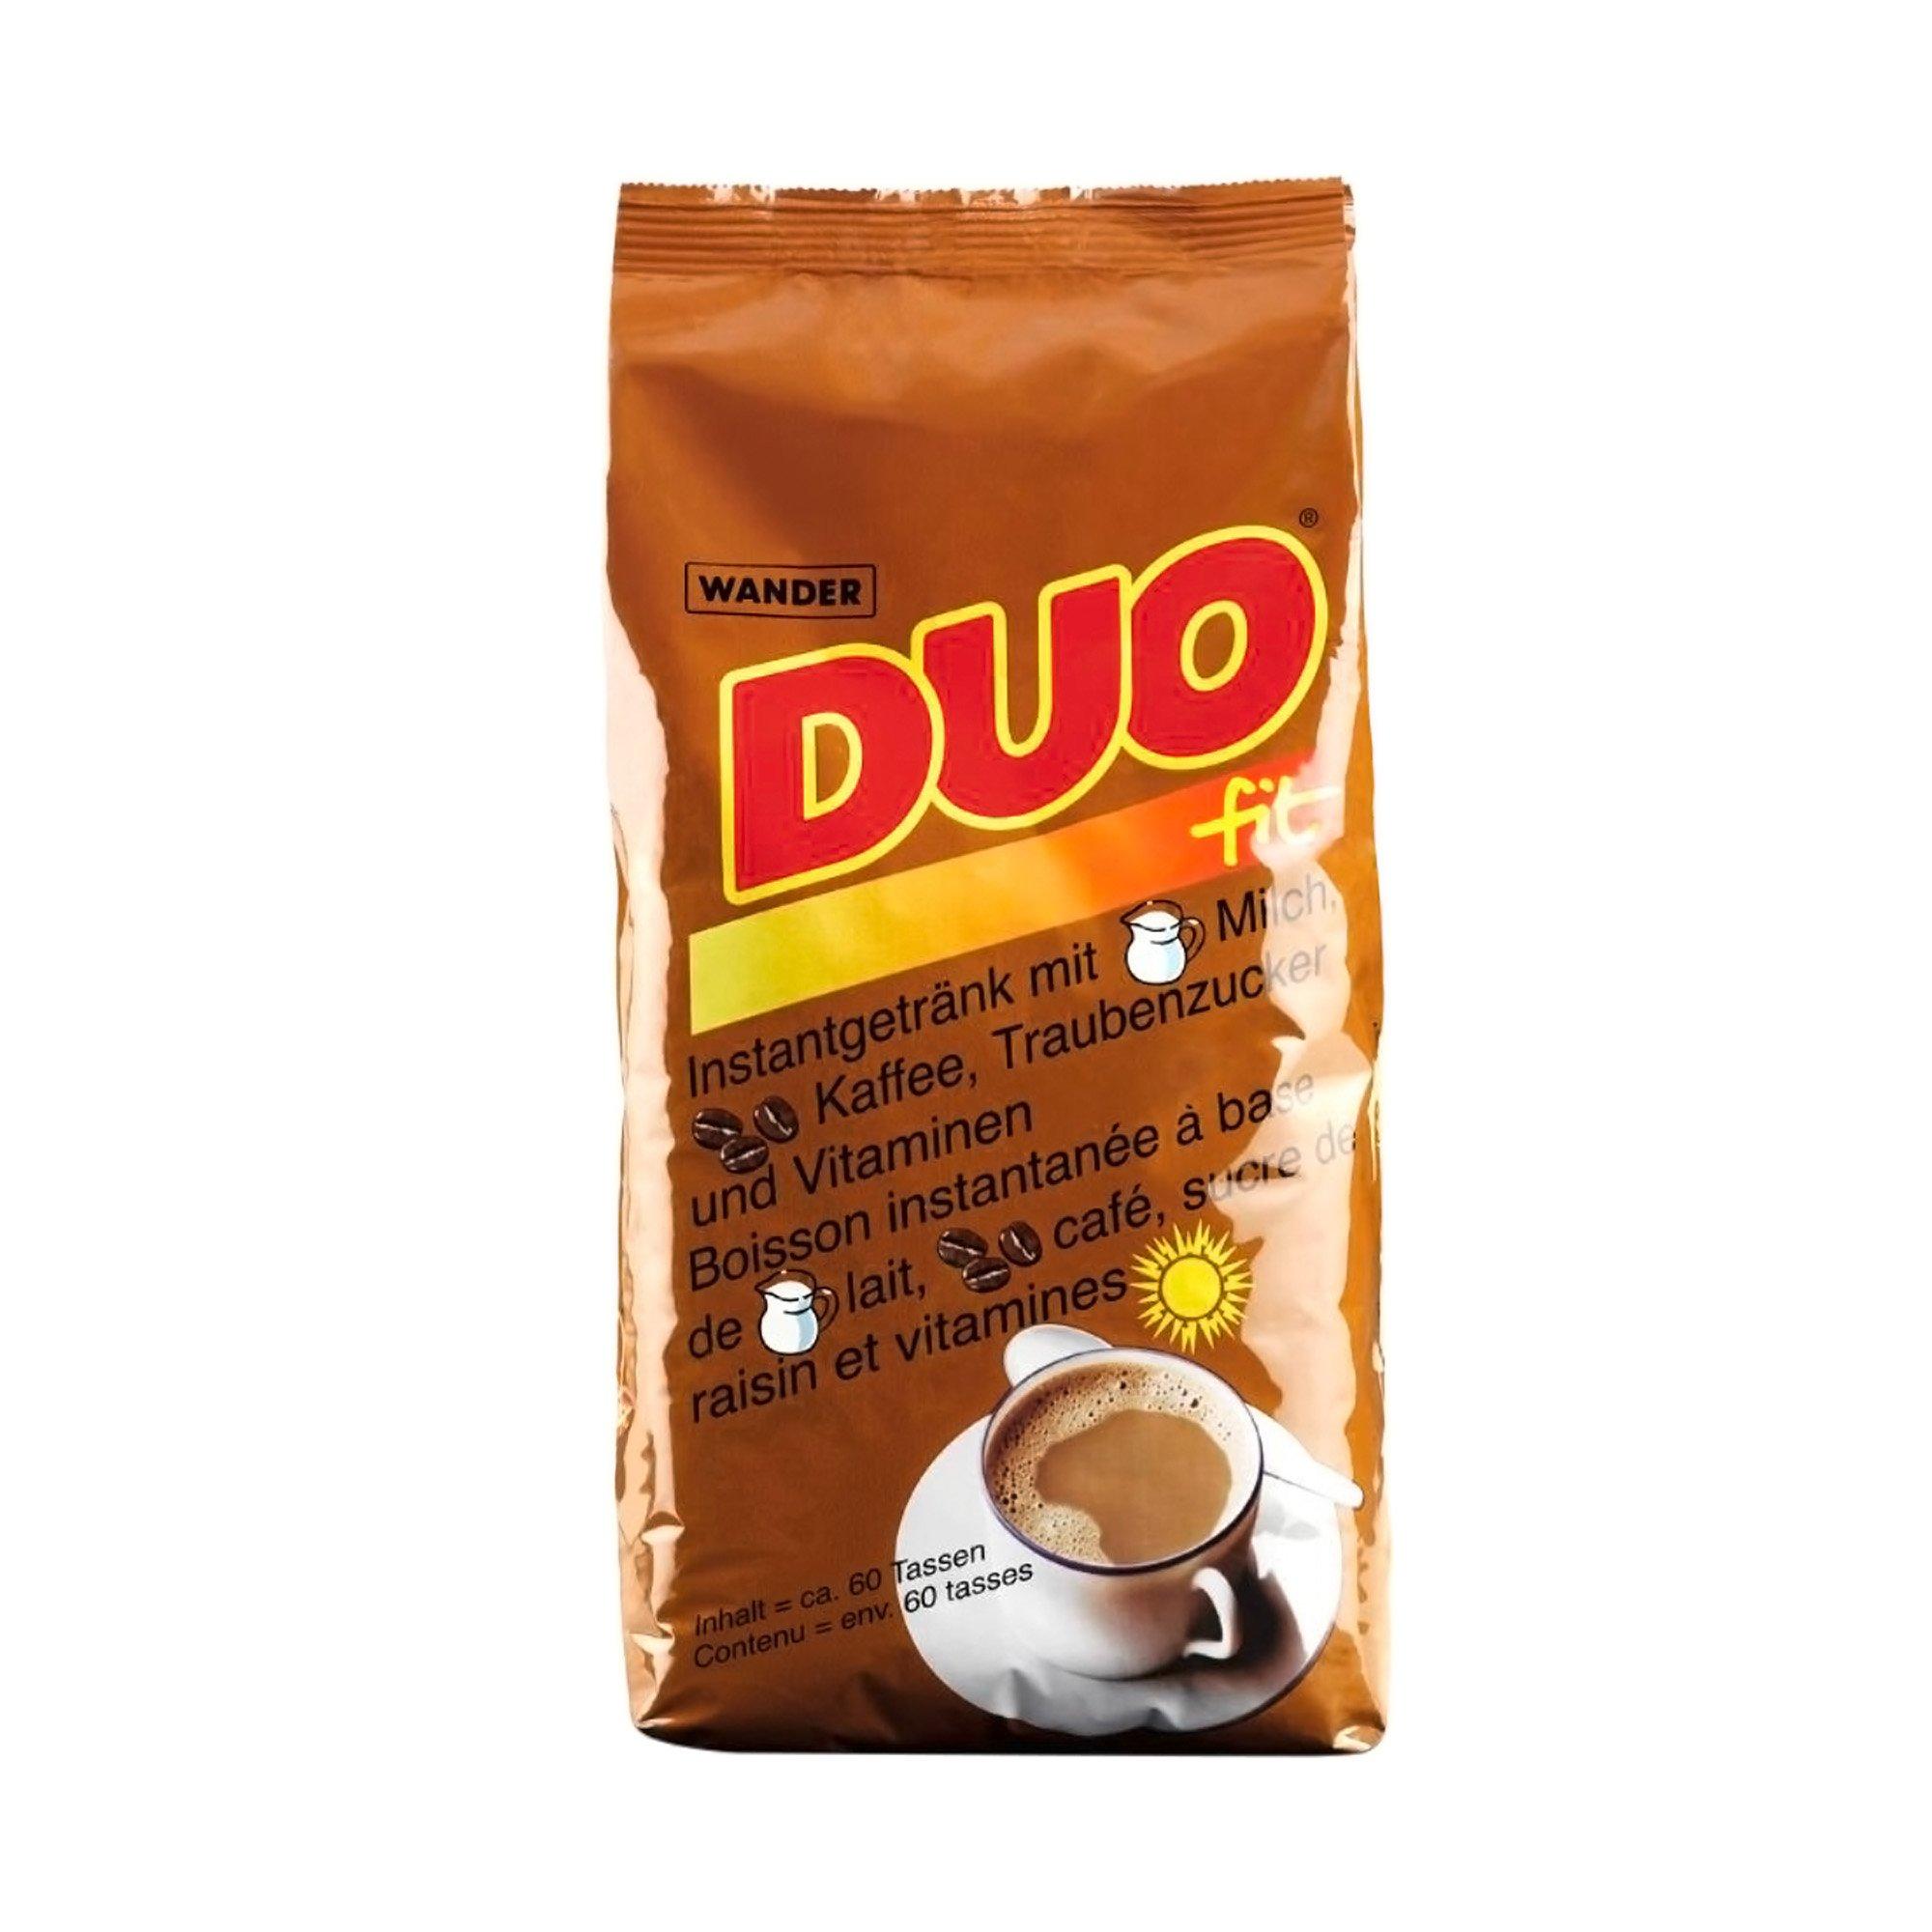 Image of Wander Duo Fit Instantgetränk - 1 kg